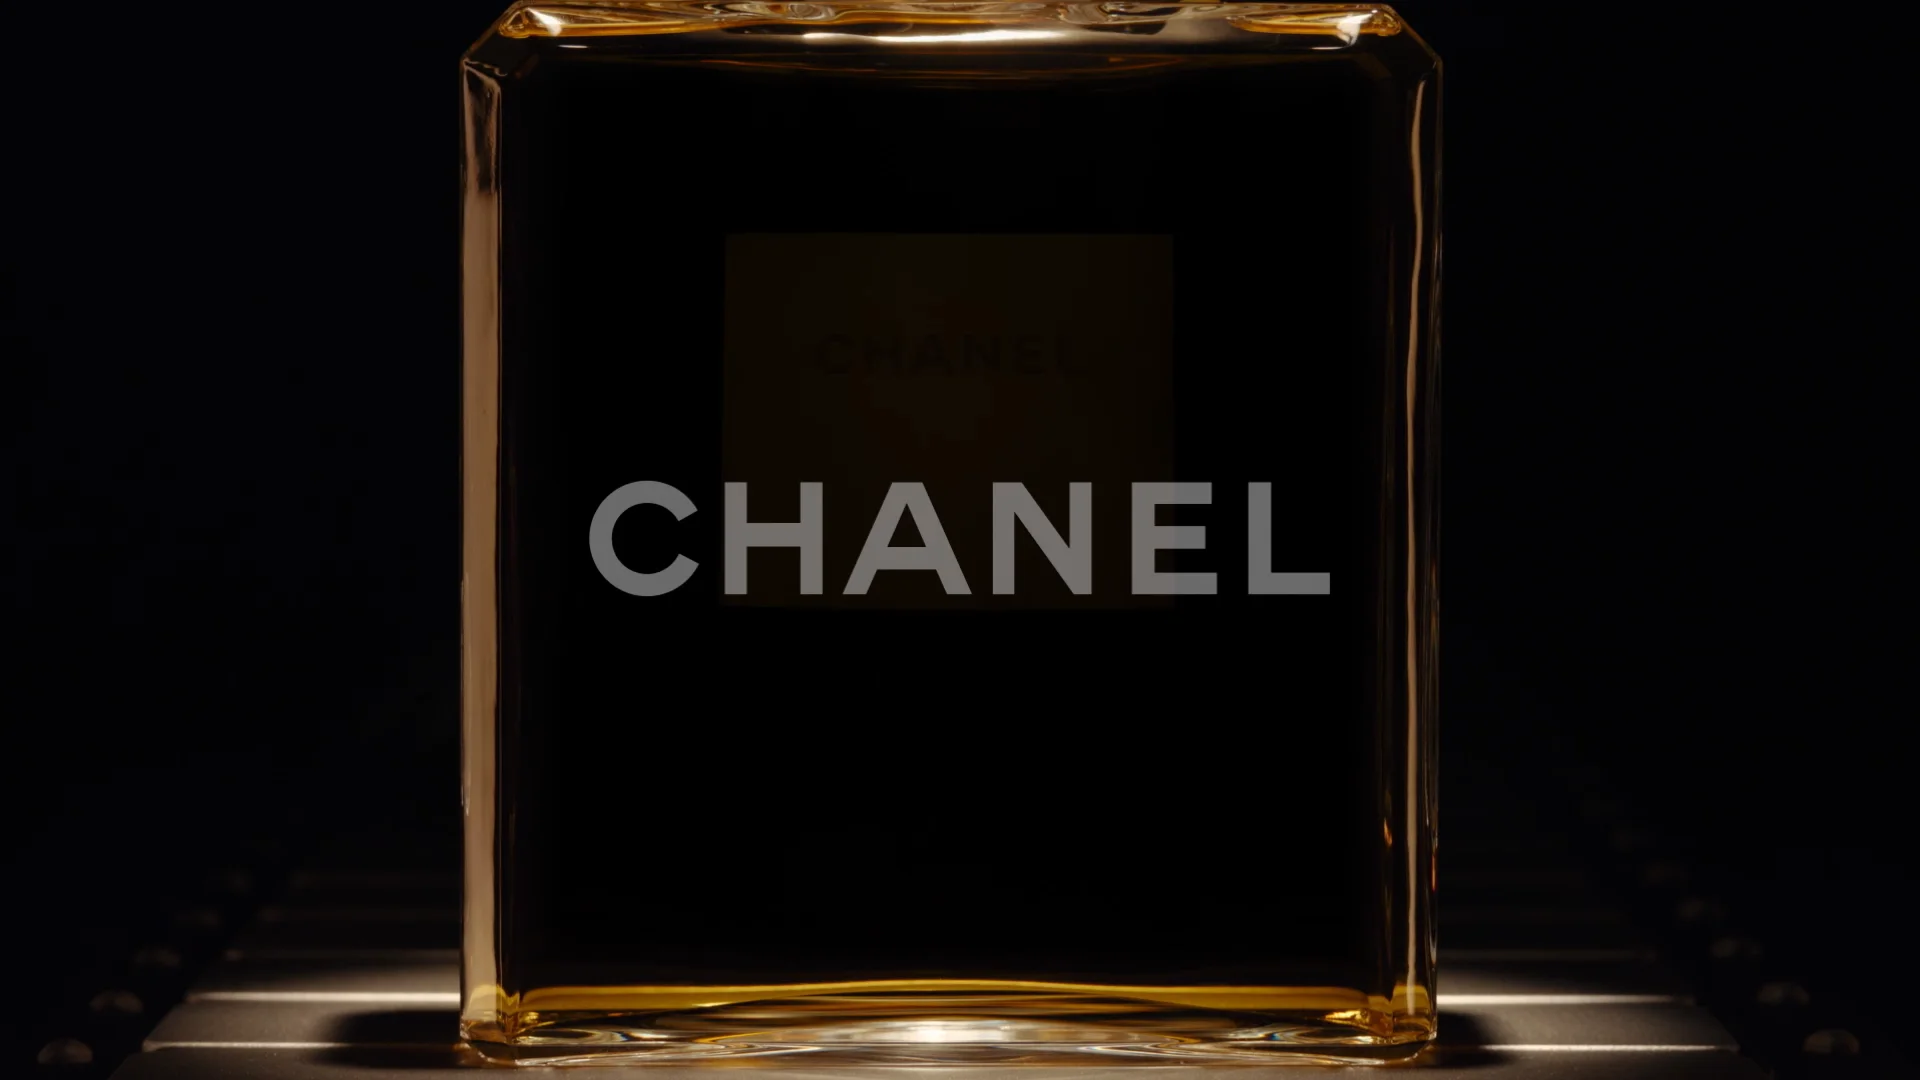 Chanel N°5 Factory by Thomas Lagrange and Mikros - Motion design - STASH  : Motion design – STASH